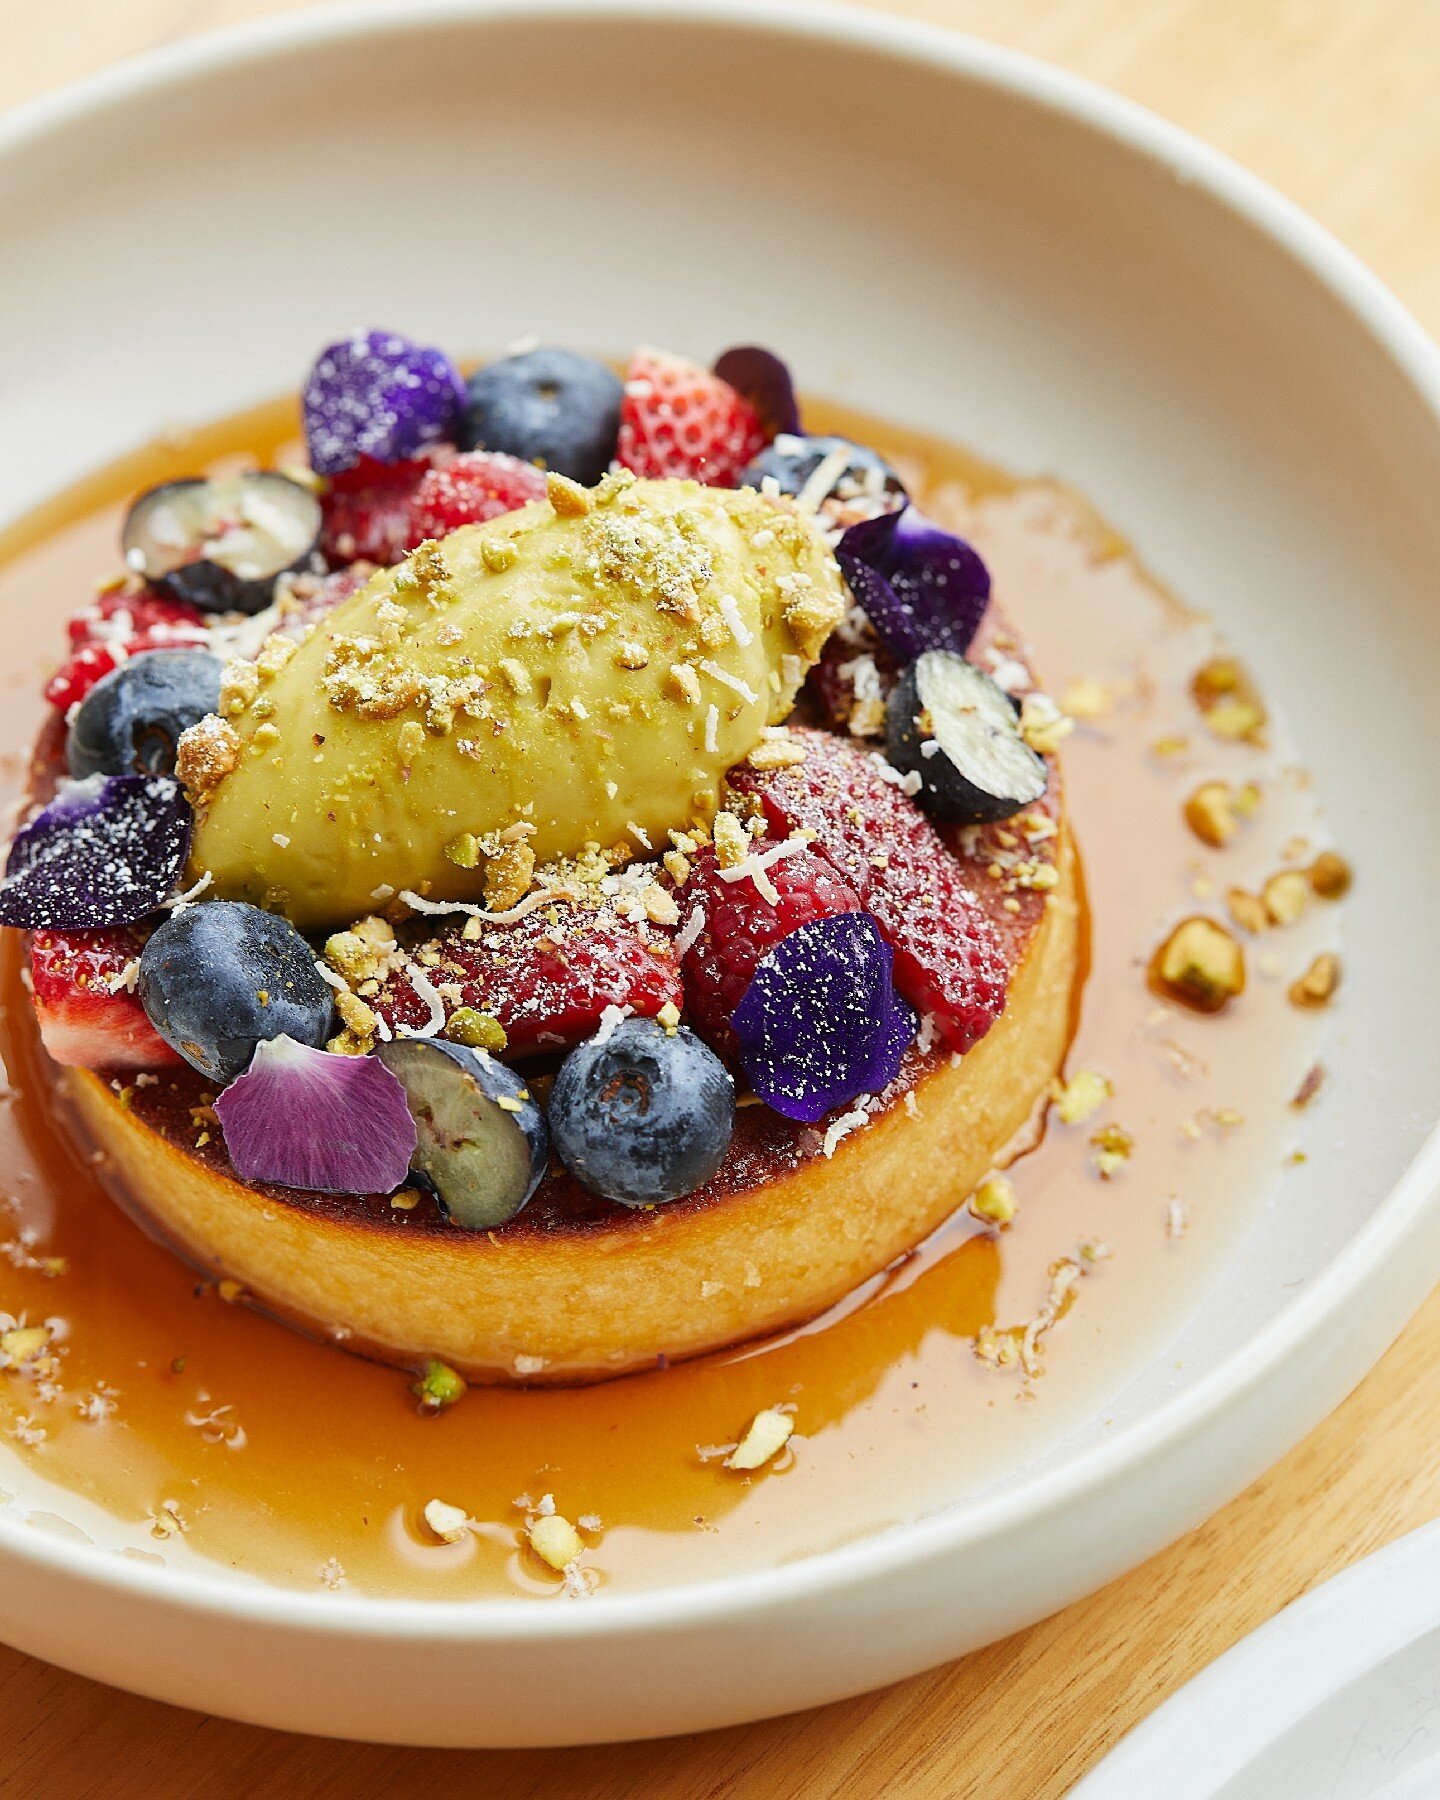 Definition of a &quot;good time&quot;: #Monstera hotcakes with seasonal fruits, pistachio cream and thyme maple syrup. 😍